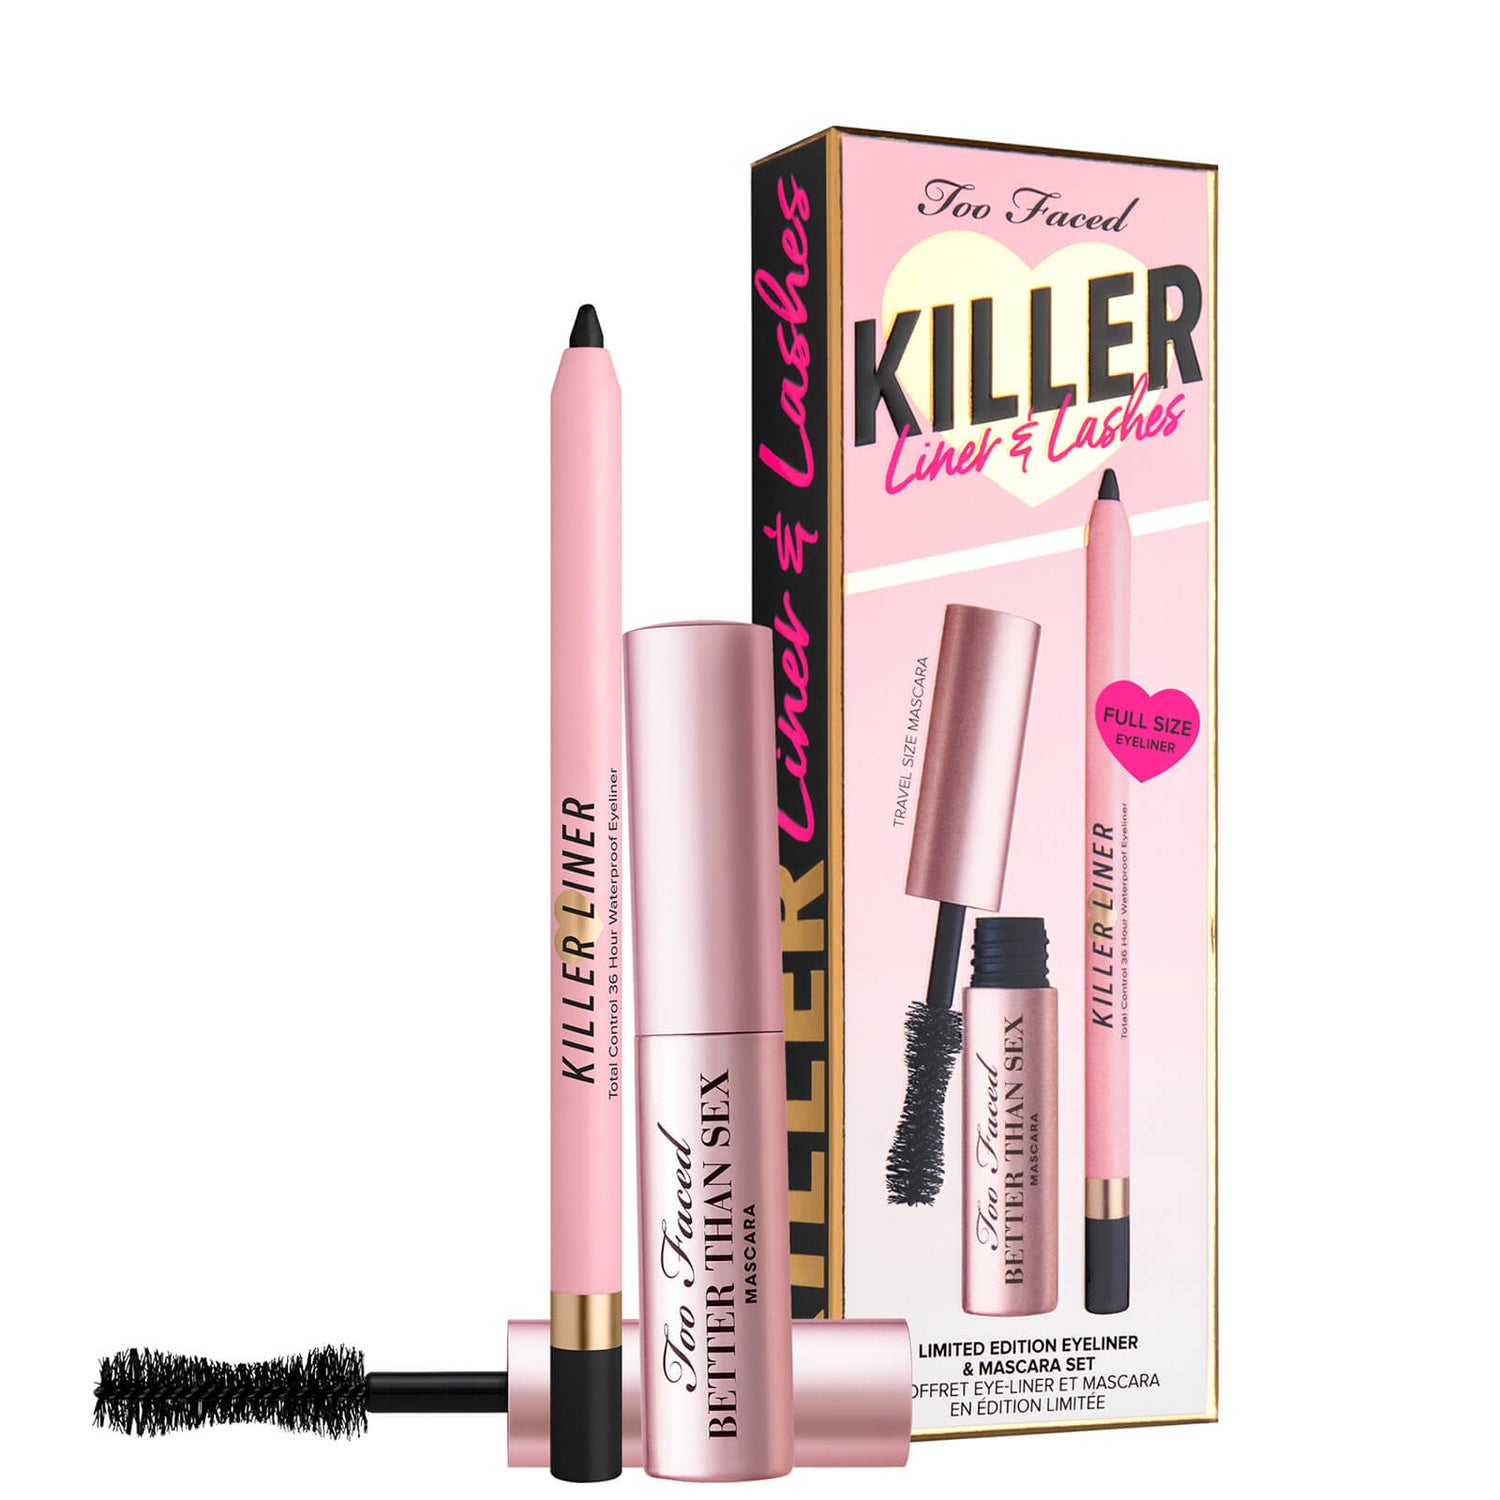 Too Faced Limited Edition Killer Lashes and Liner Mascara and Eyeliner Duo Set (värde £28.00)